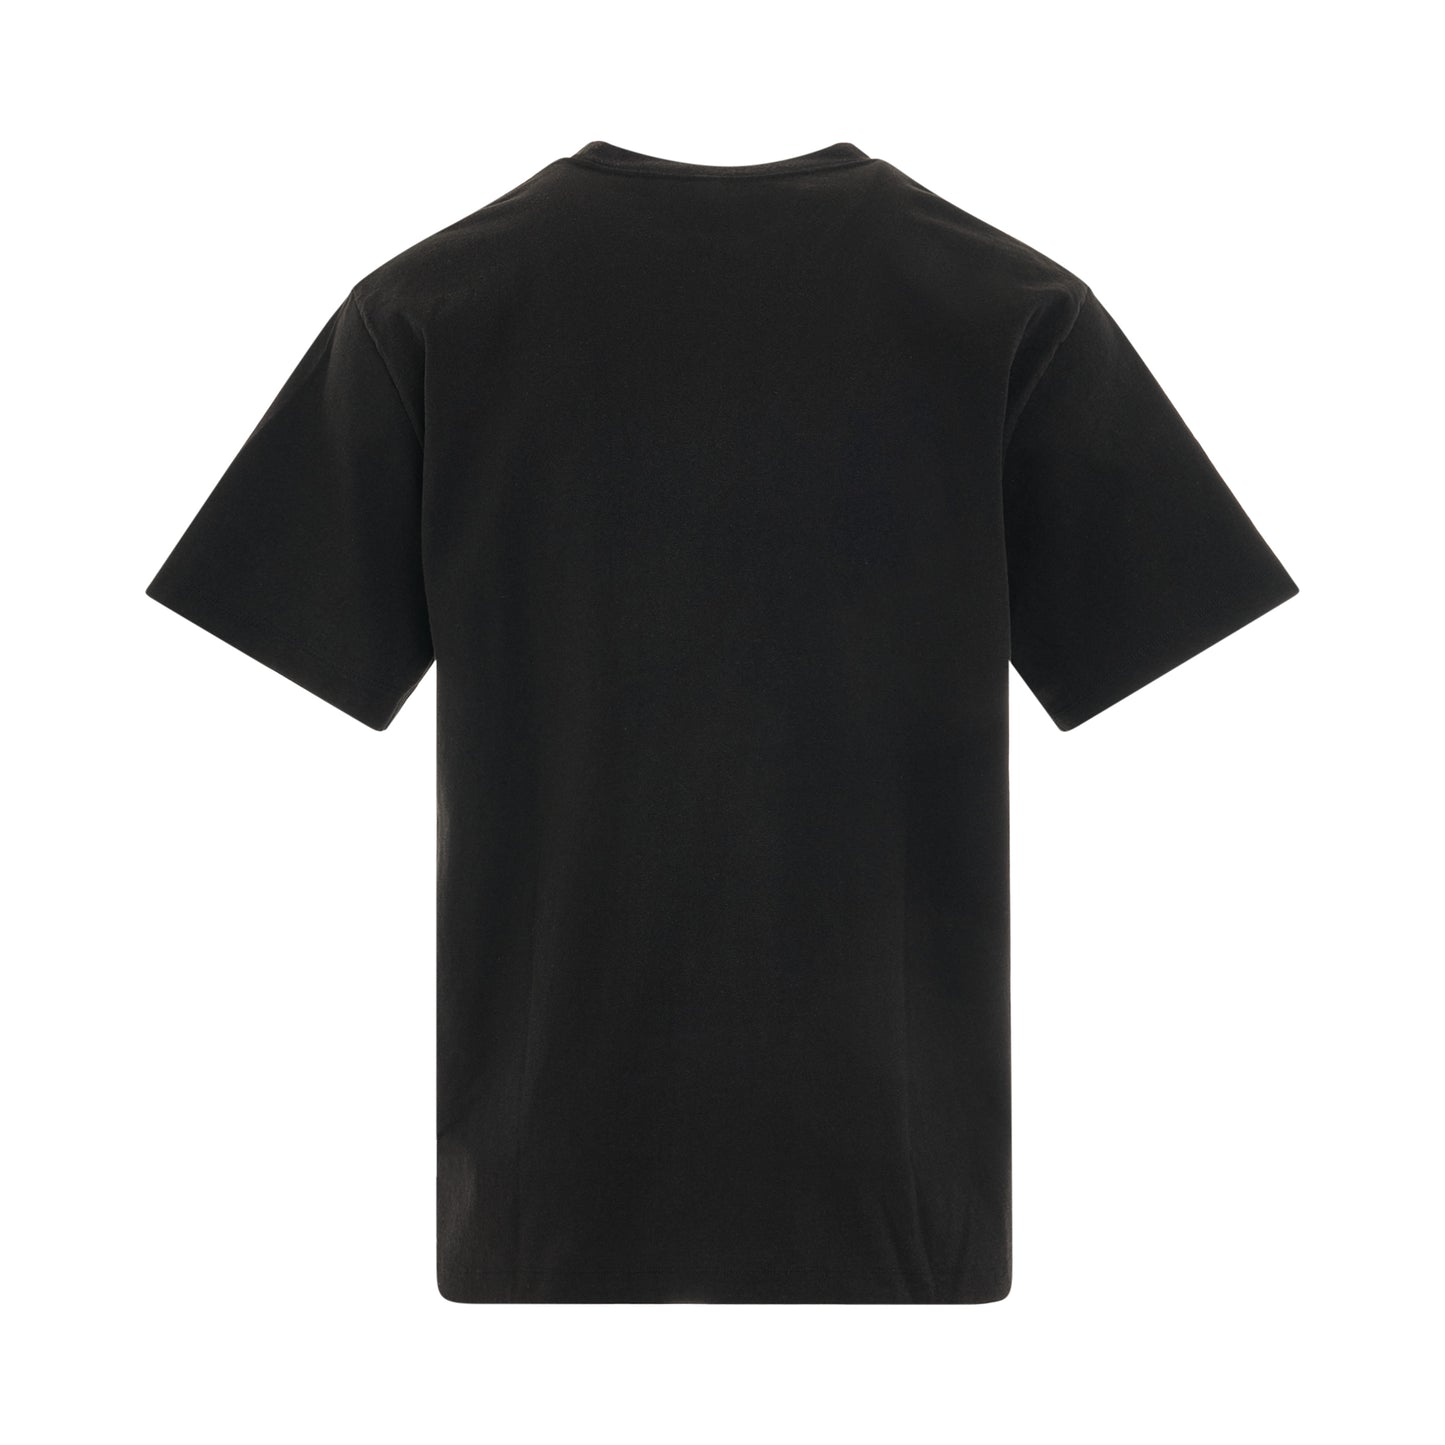 "DOUBLAND" Embroidery T-Shirt in Black